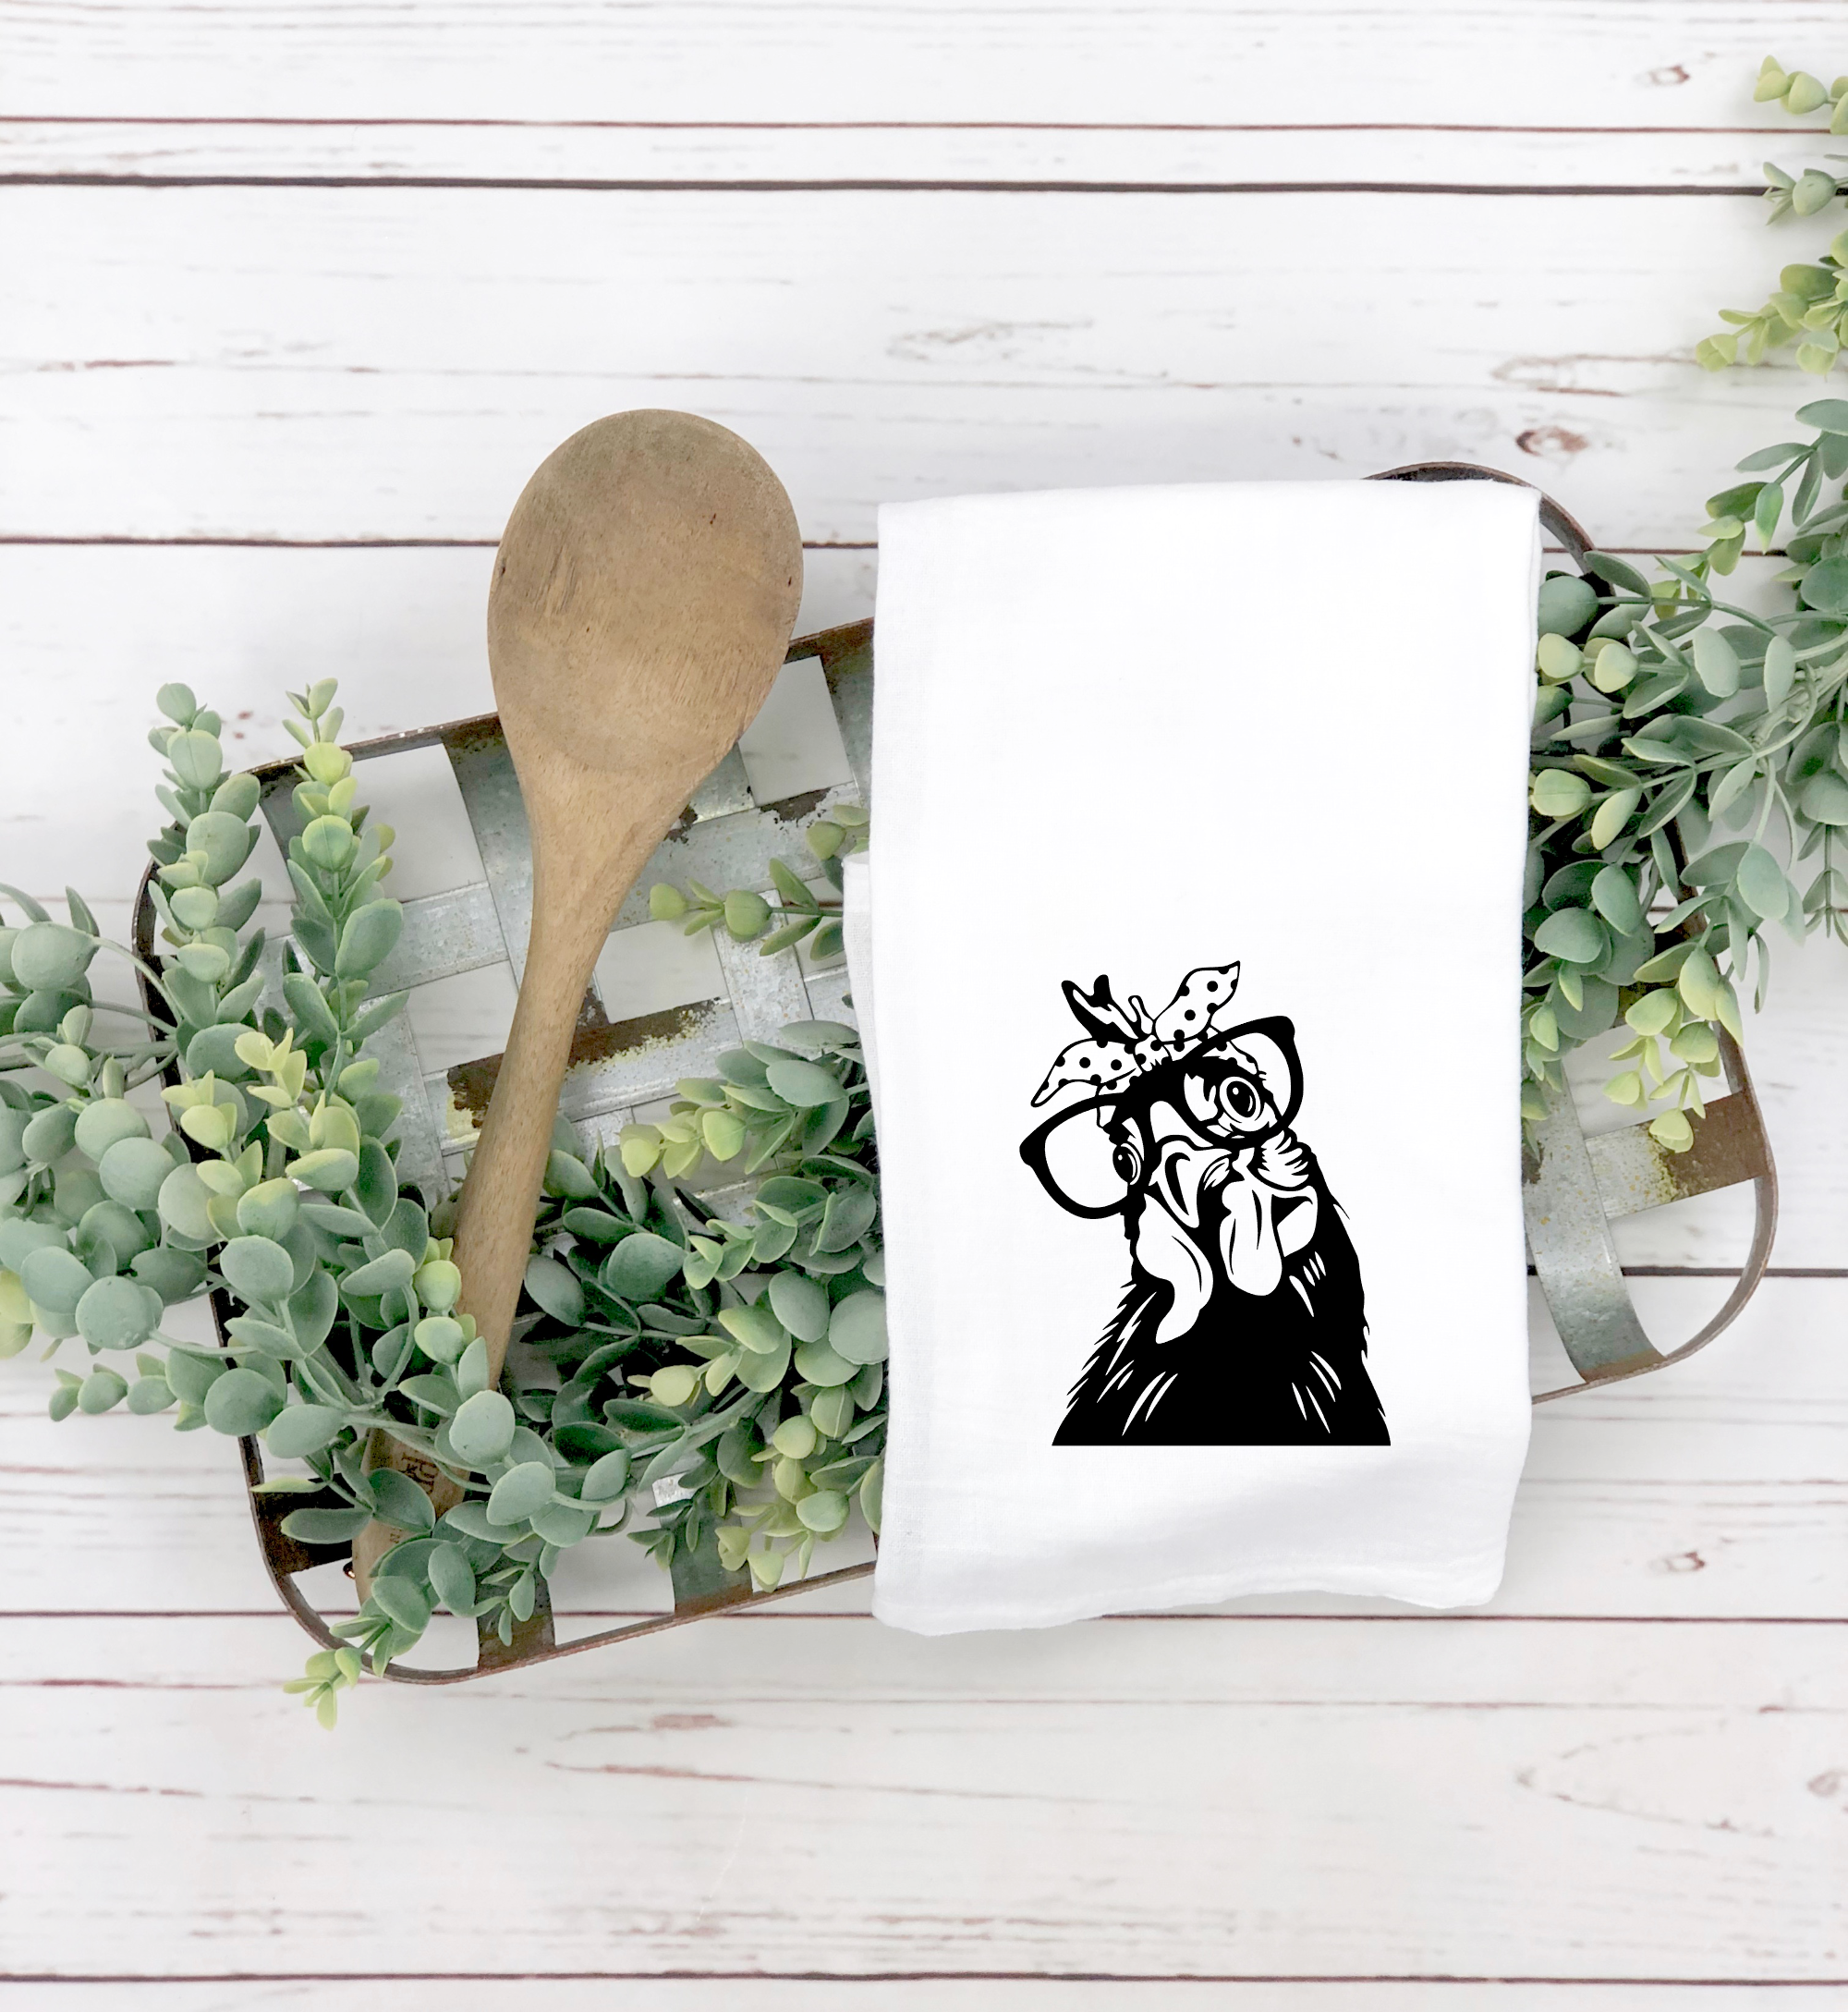 A Funny Chicken Tea Towel with a printed image of a chicken wearing glasses and a bow tie, accompanied by a wooden spoon, on a rustic white wooden background flanked by greenery.